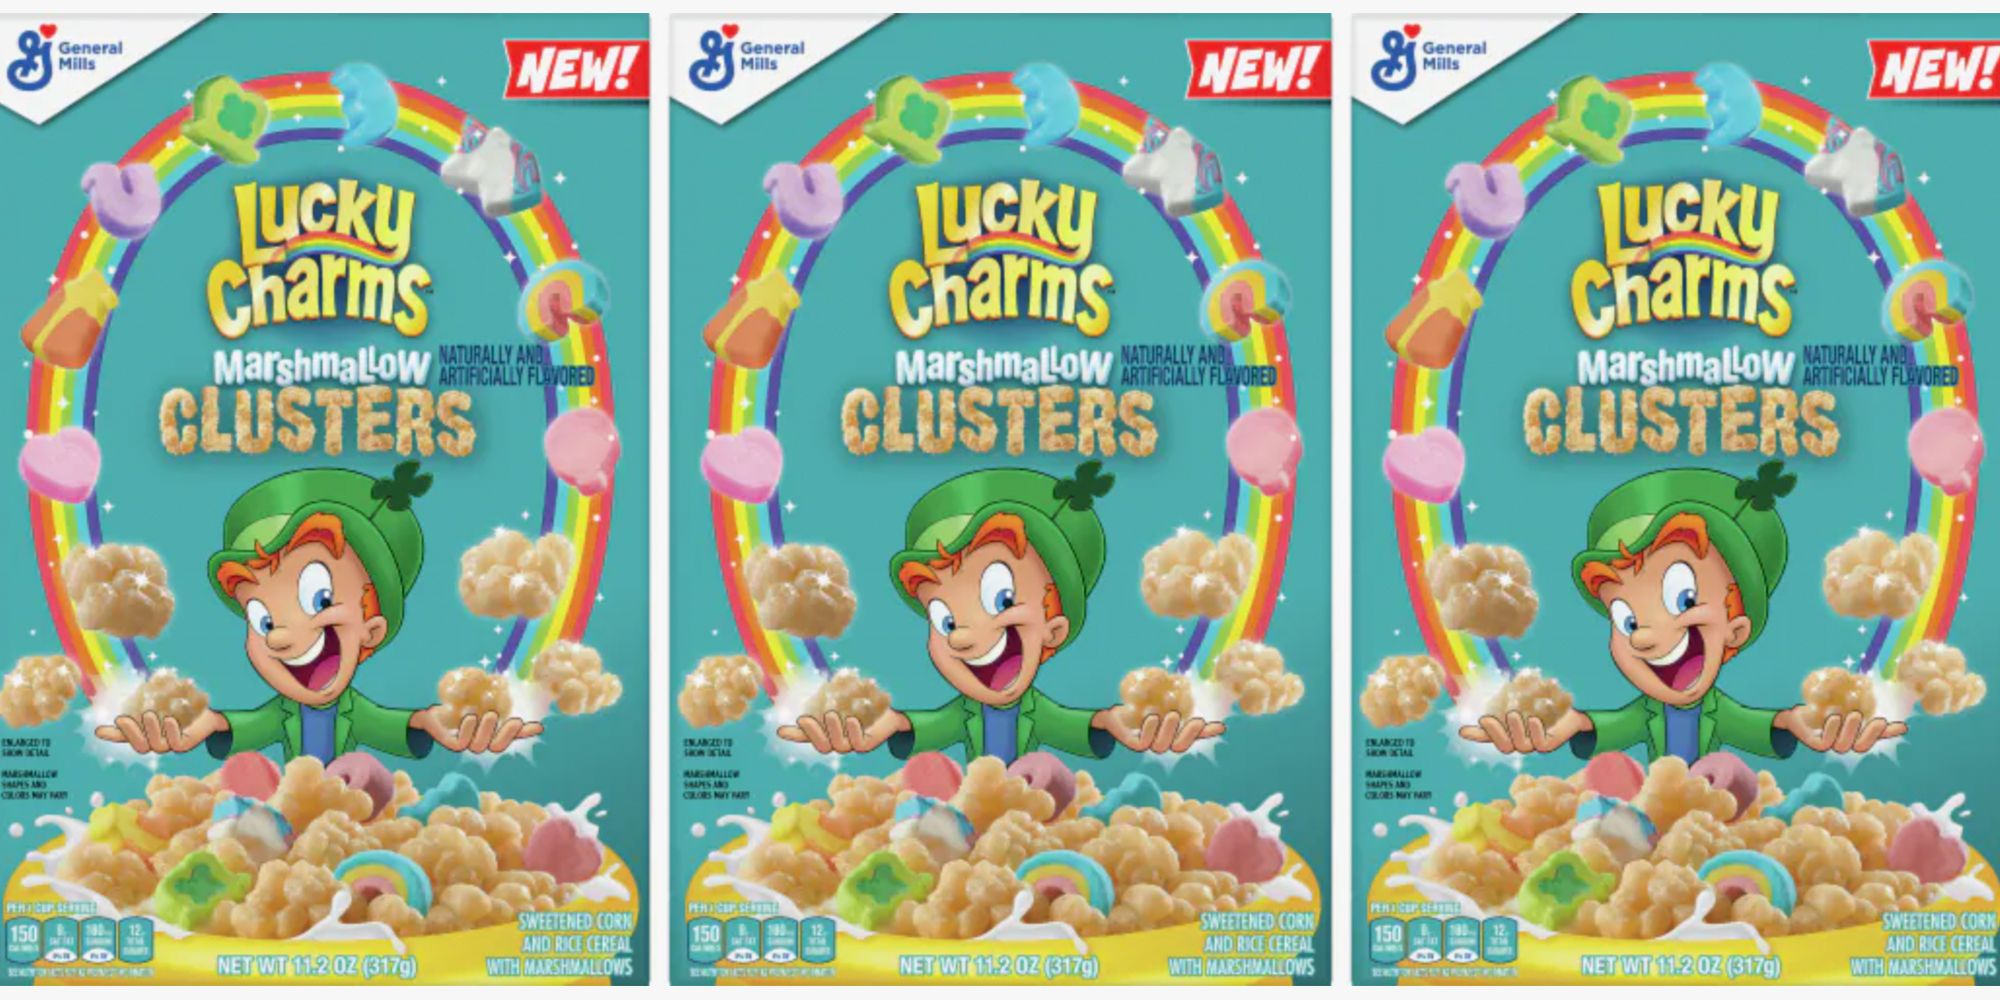 The Lucky Charms Clusters Is Filled With More Marshmallow Than Usual